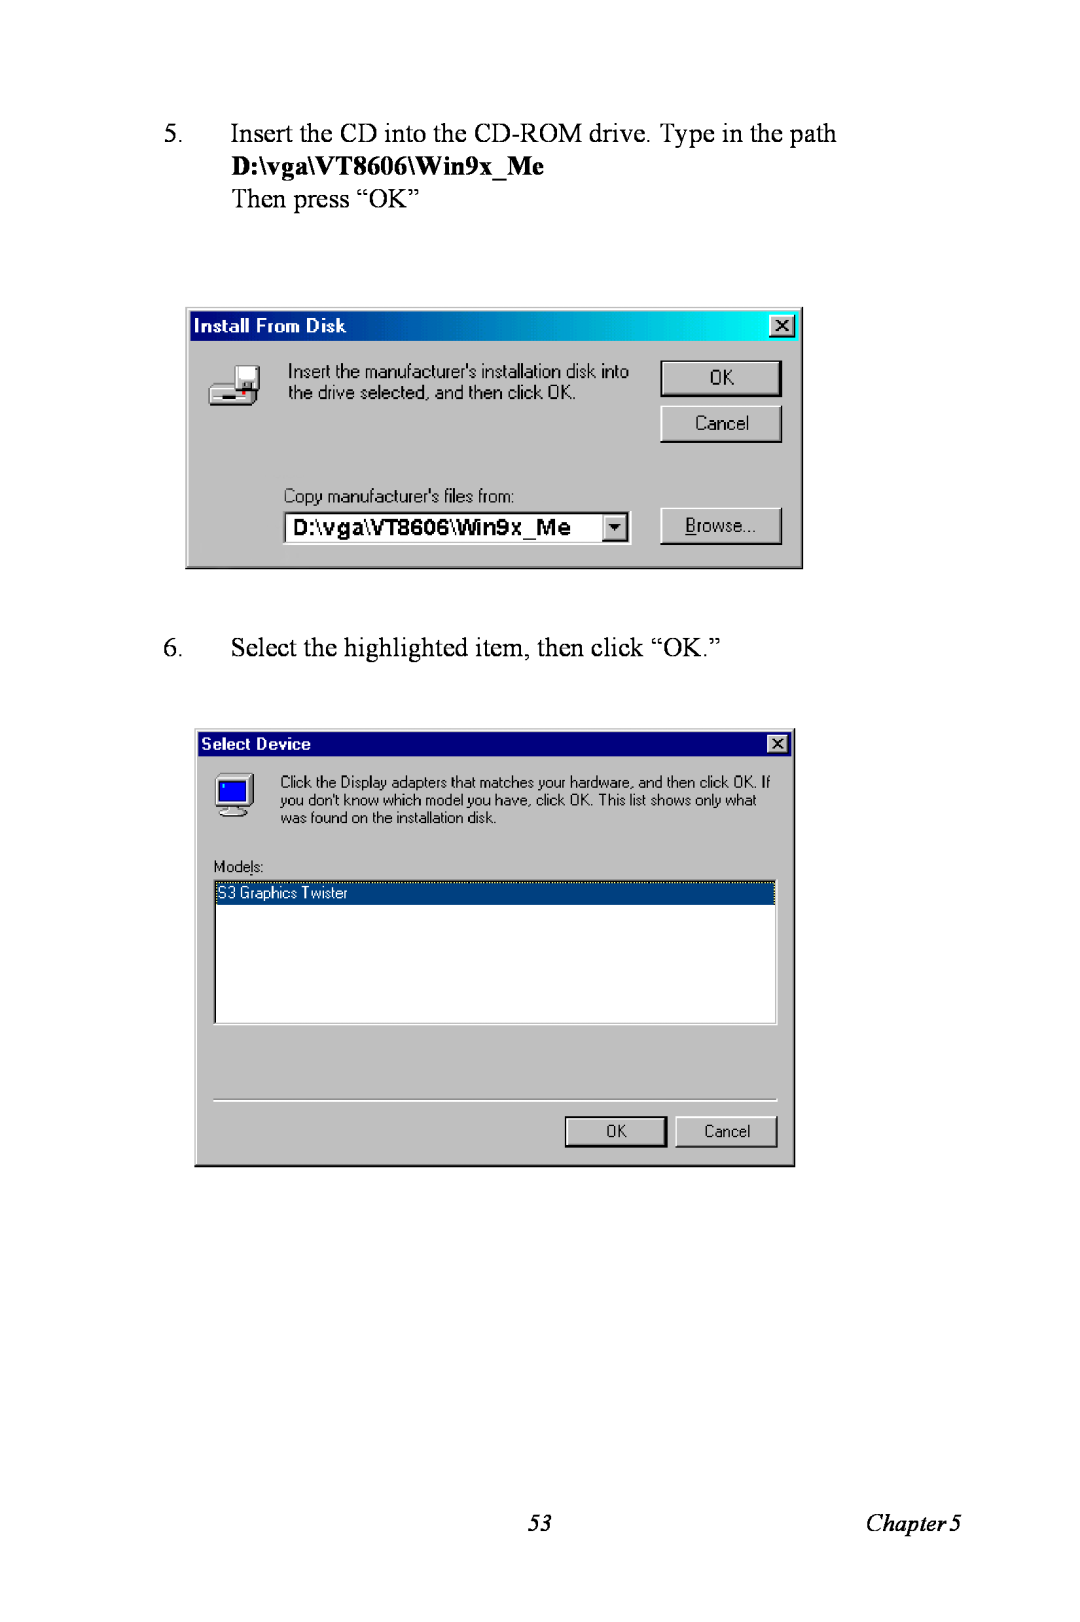 Intel PCM-3370 user manual D\vga\VT8606\Win9xMe Then press “OK”, Insert the CD into the CD-ROM drive. Type in the path 